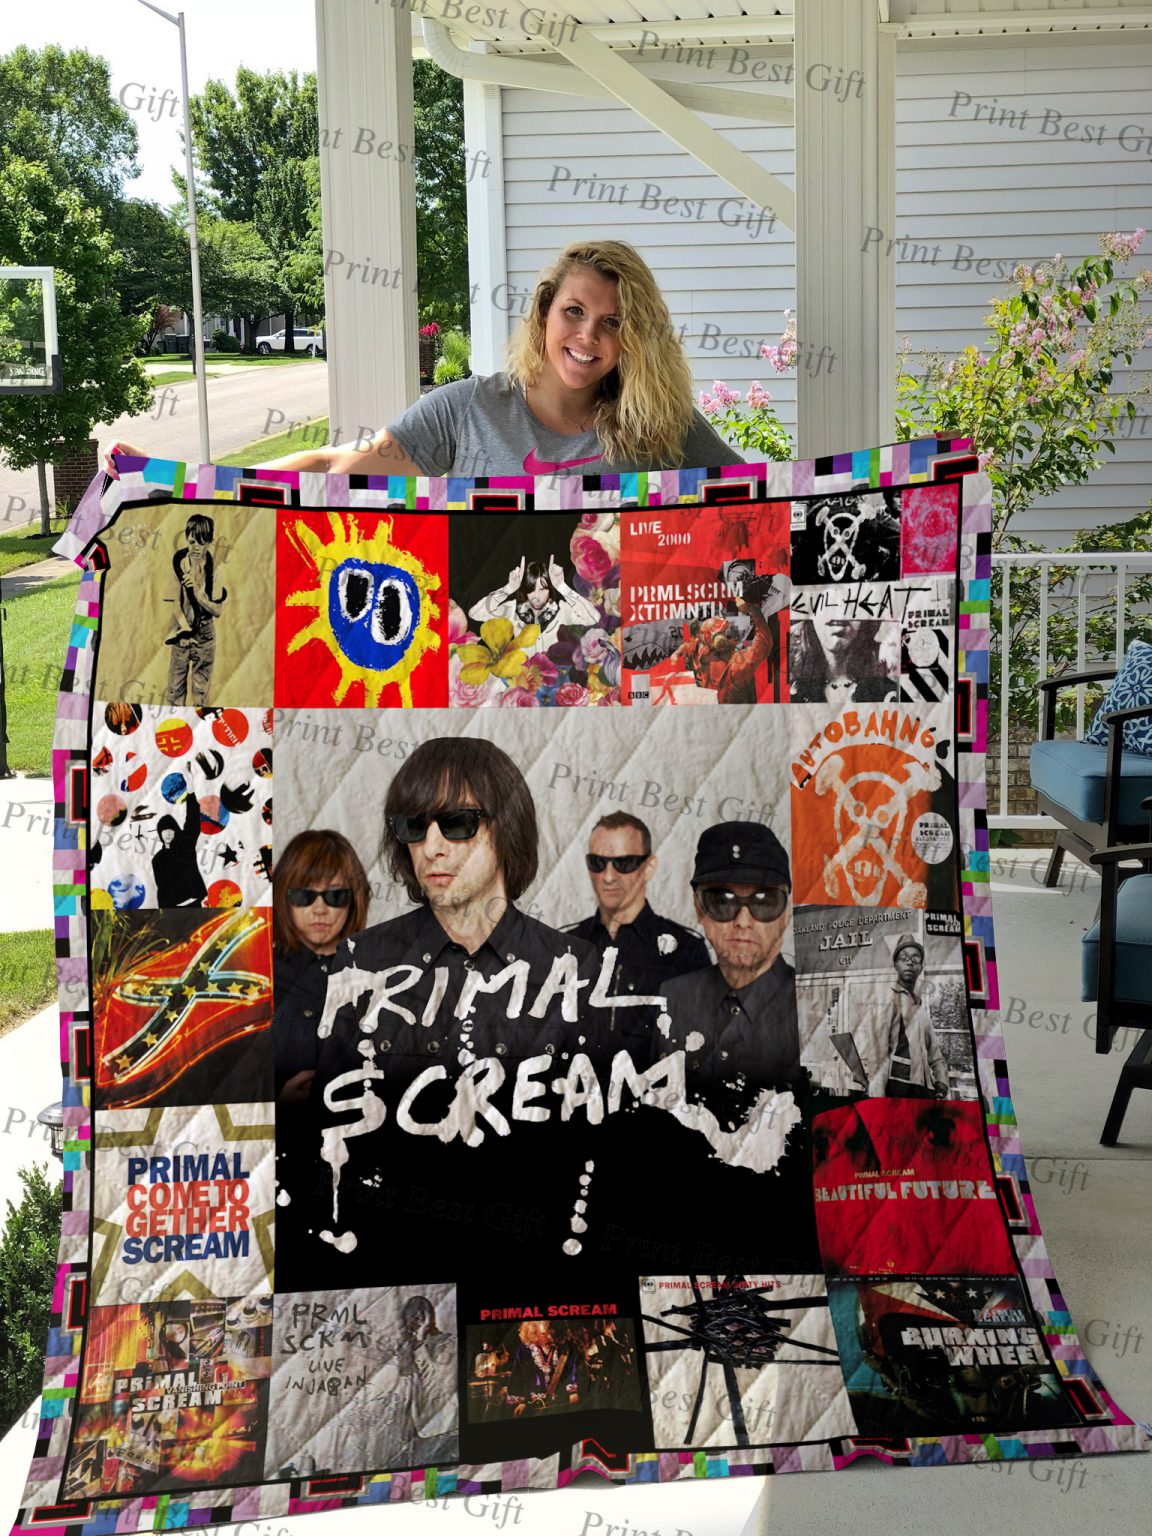 Primal Scream Albums Cover Poster Quilt - Pick A Quilt